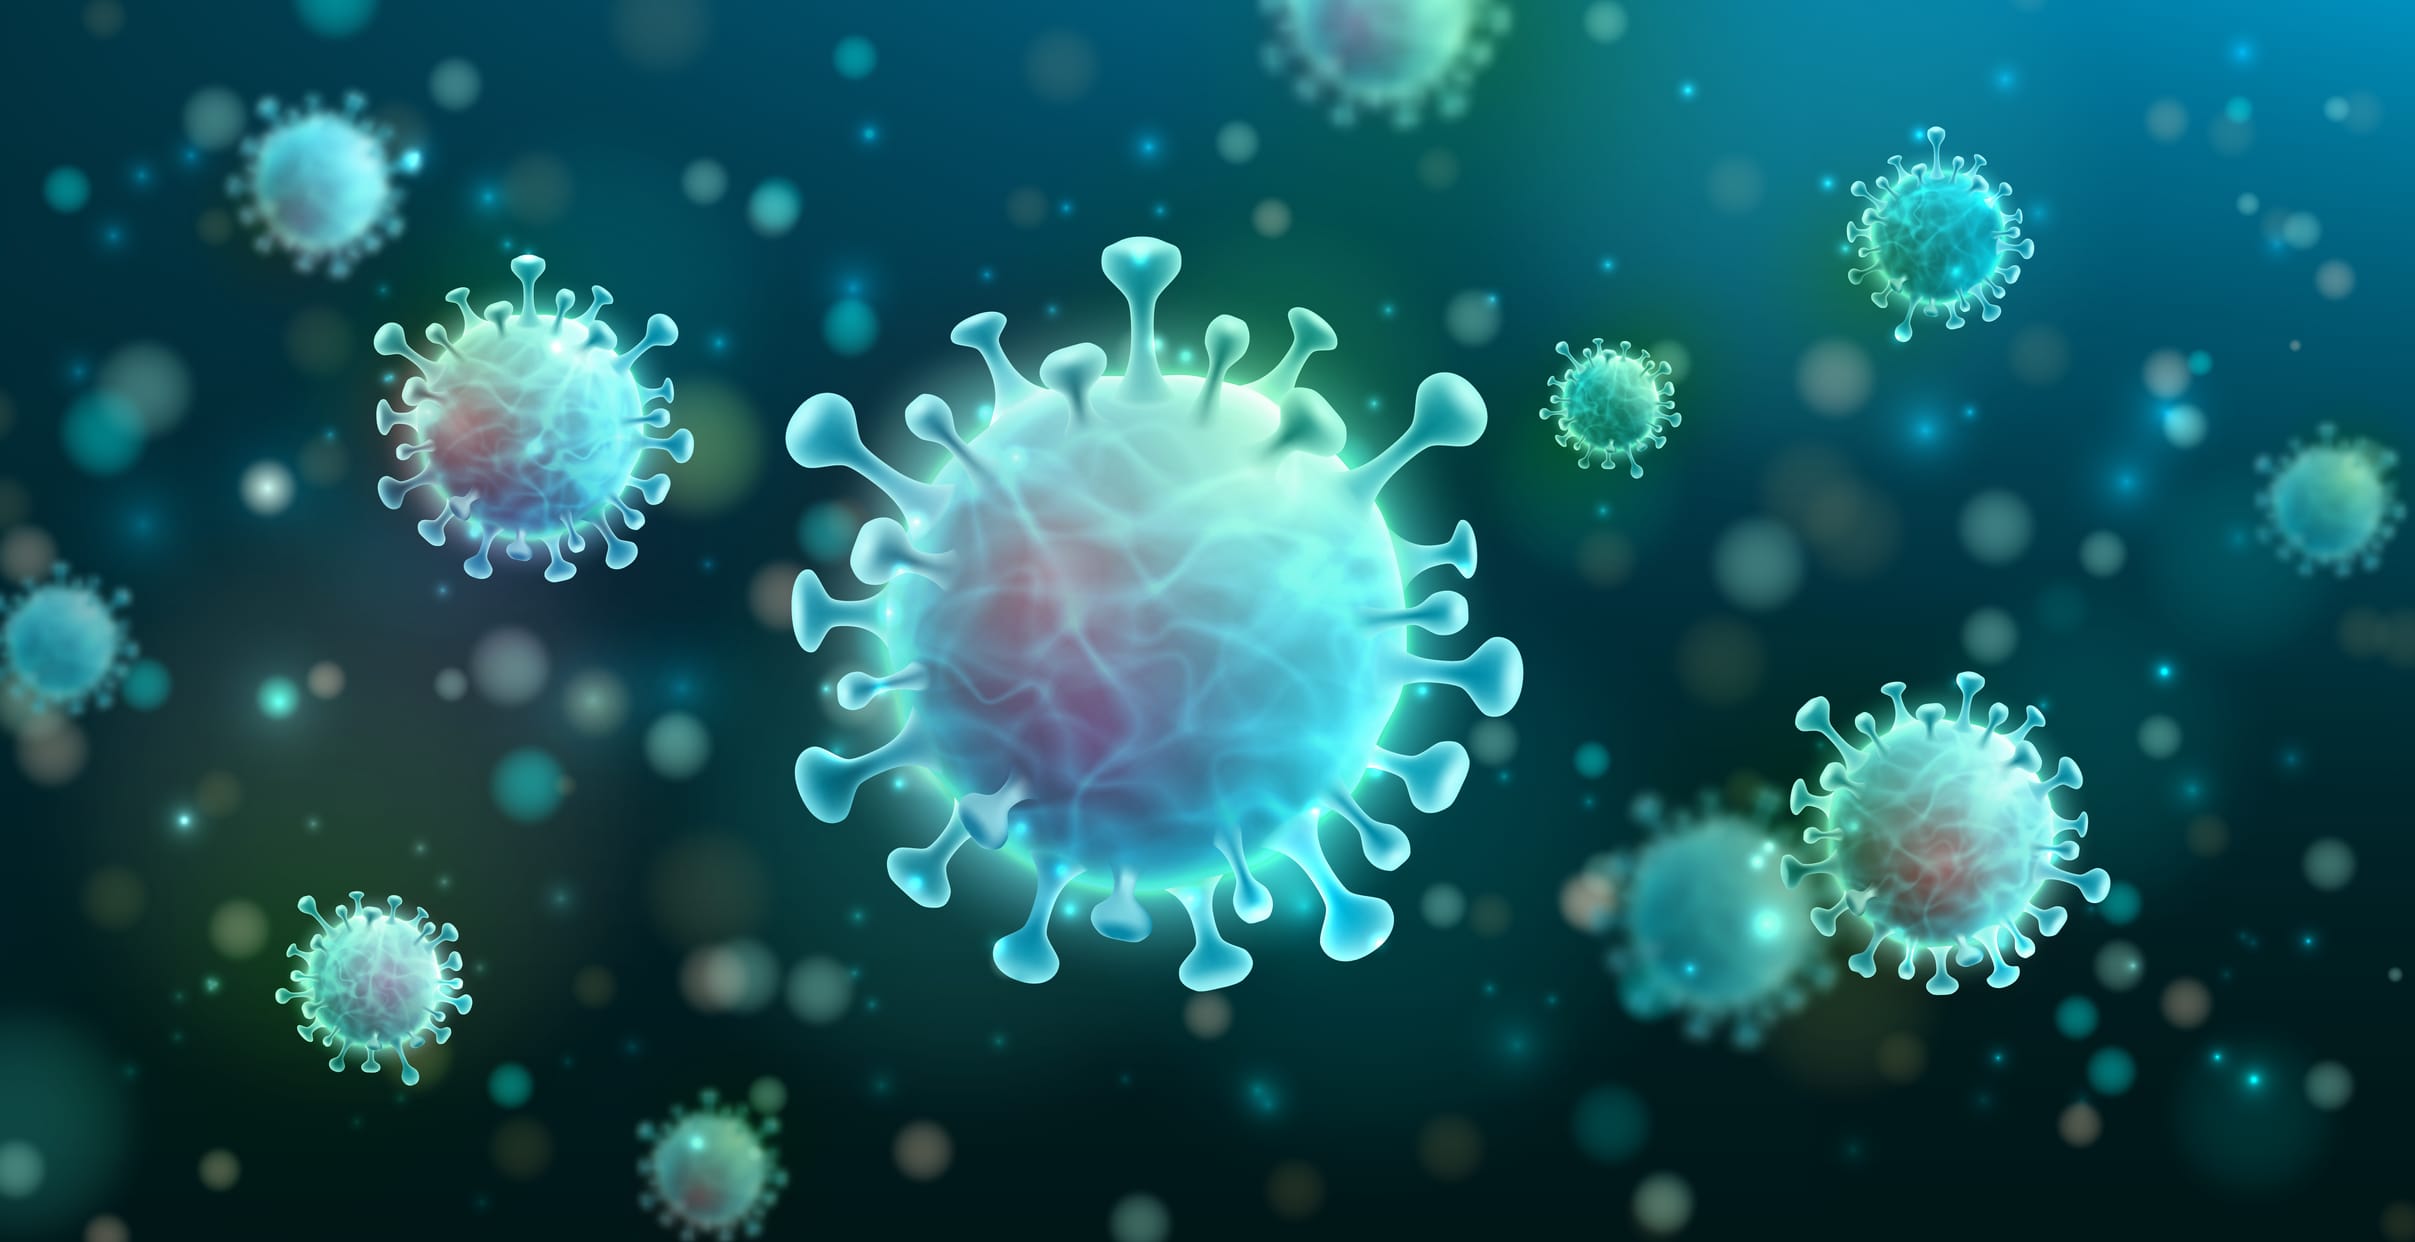 Vector of Coronavirus 2019-nCoV and Virus background with disease cells. COVID-19 Corona virus outbreaking and Pandemic medical health risk concept.